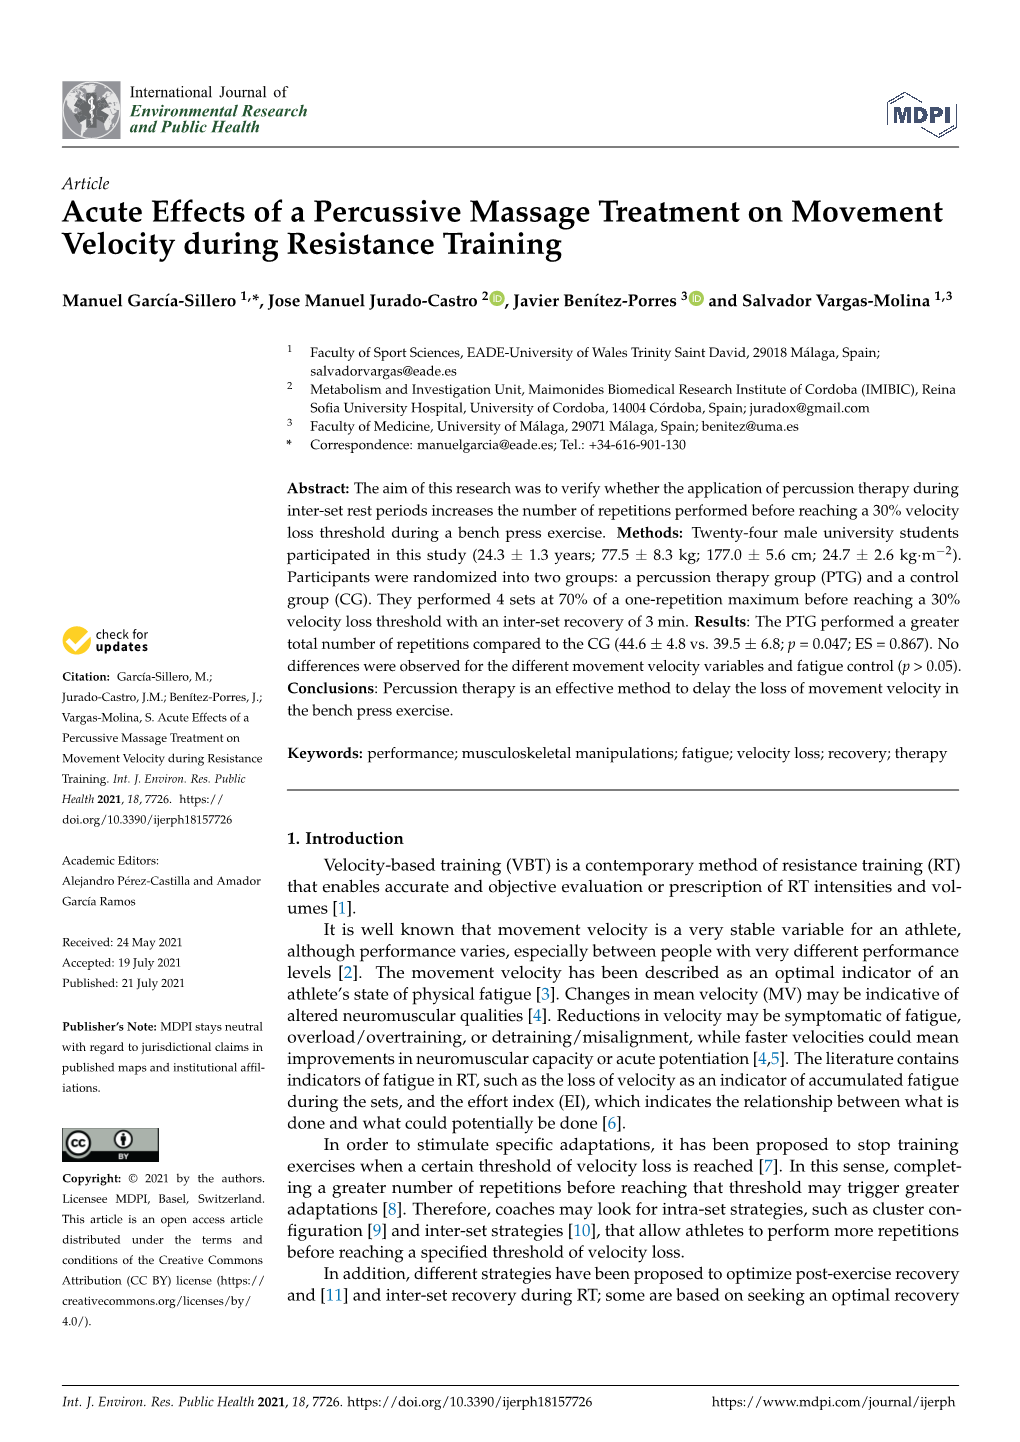 Acute Effects of a Percussive Massage Treatment on Movement Velocity During Resistance Training